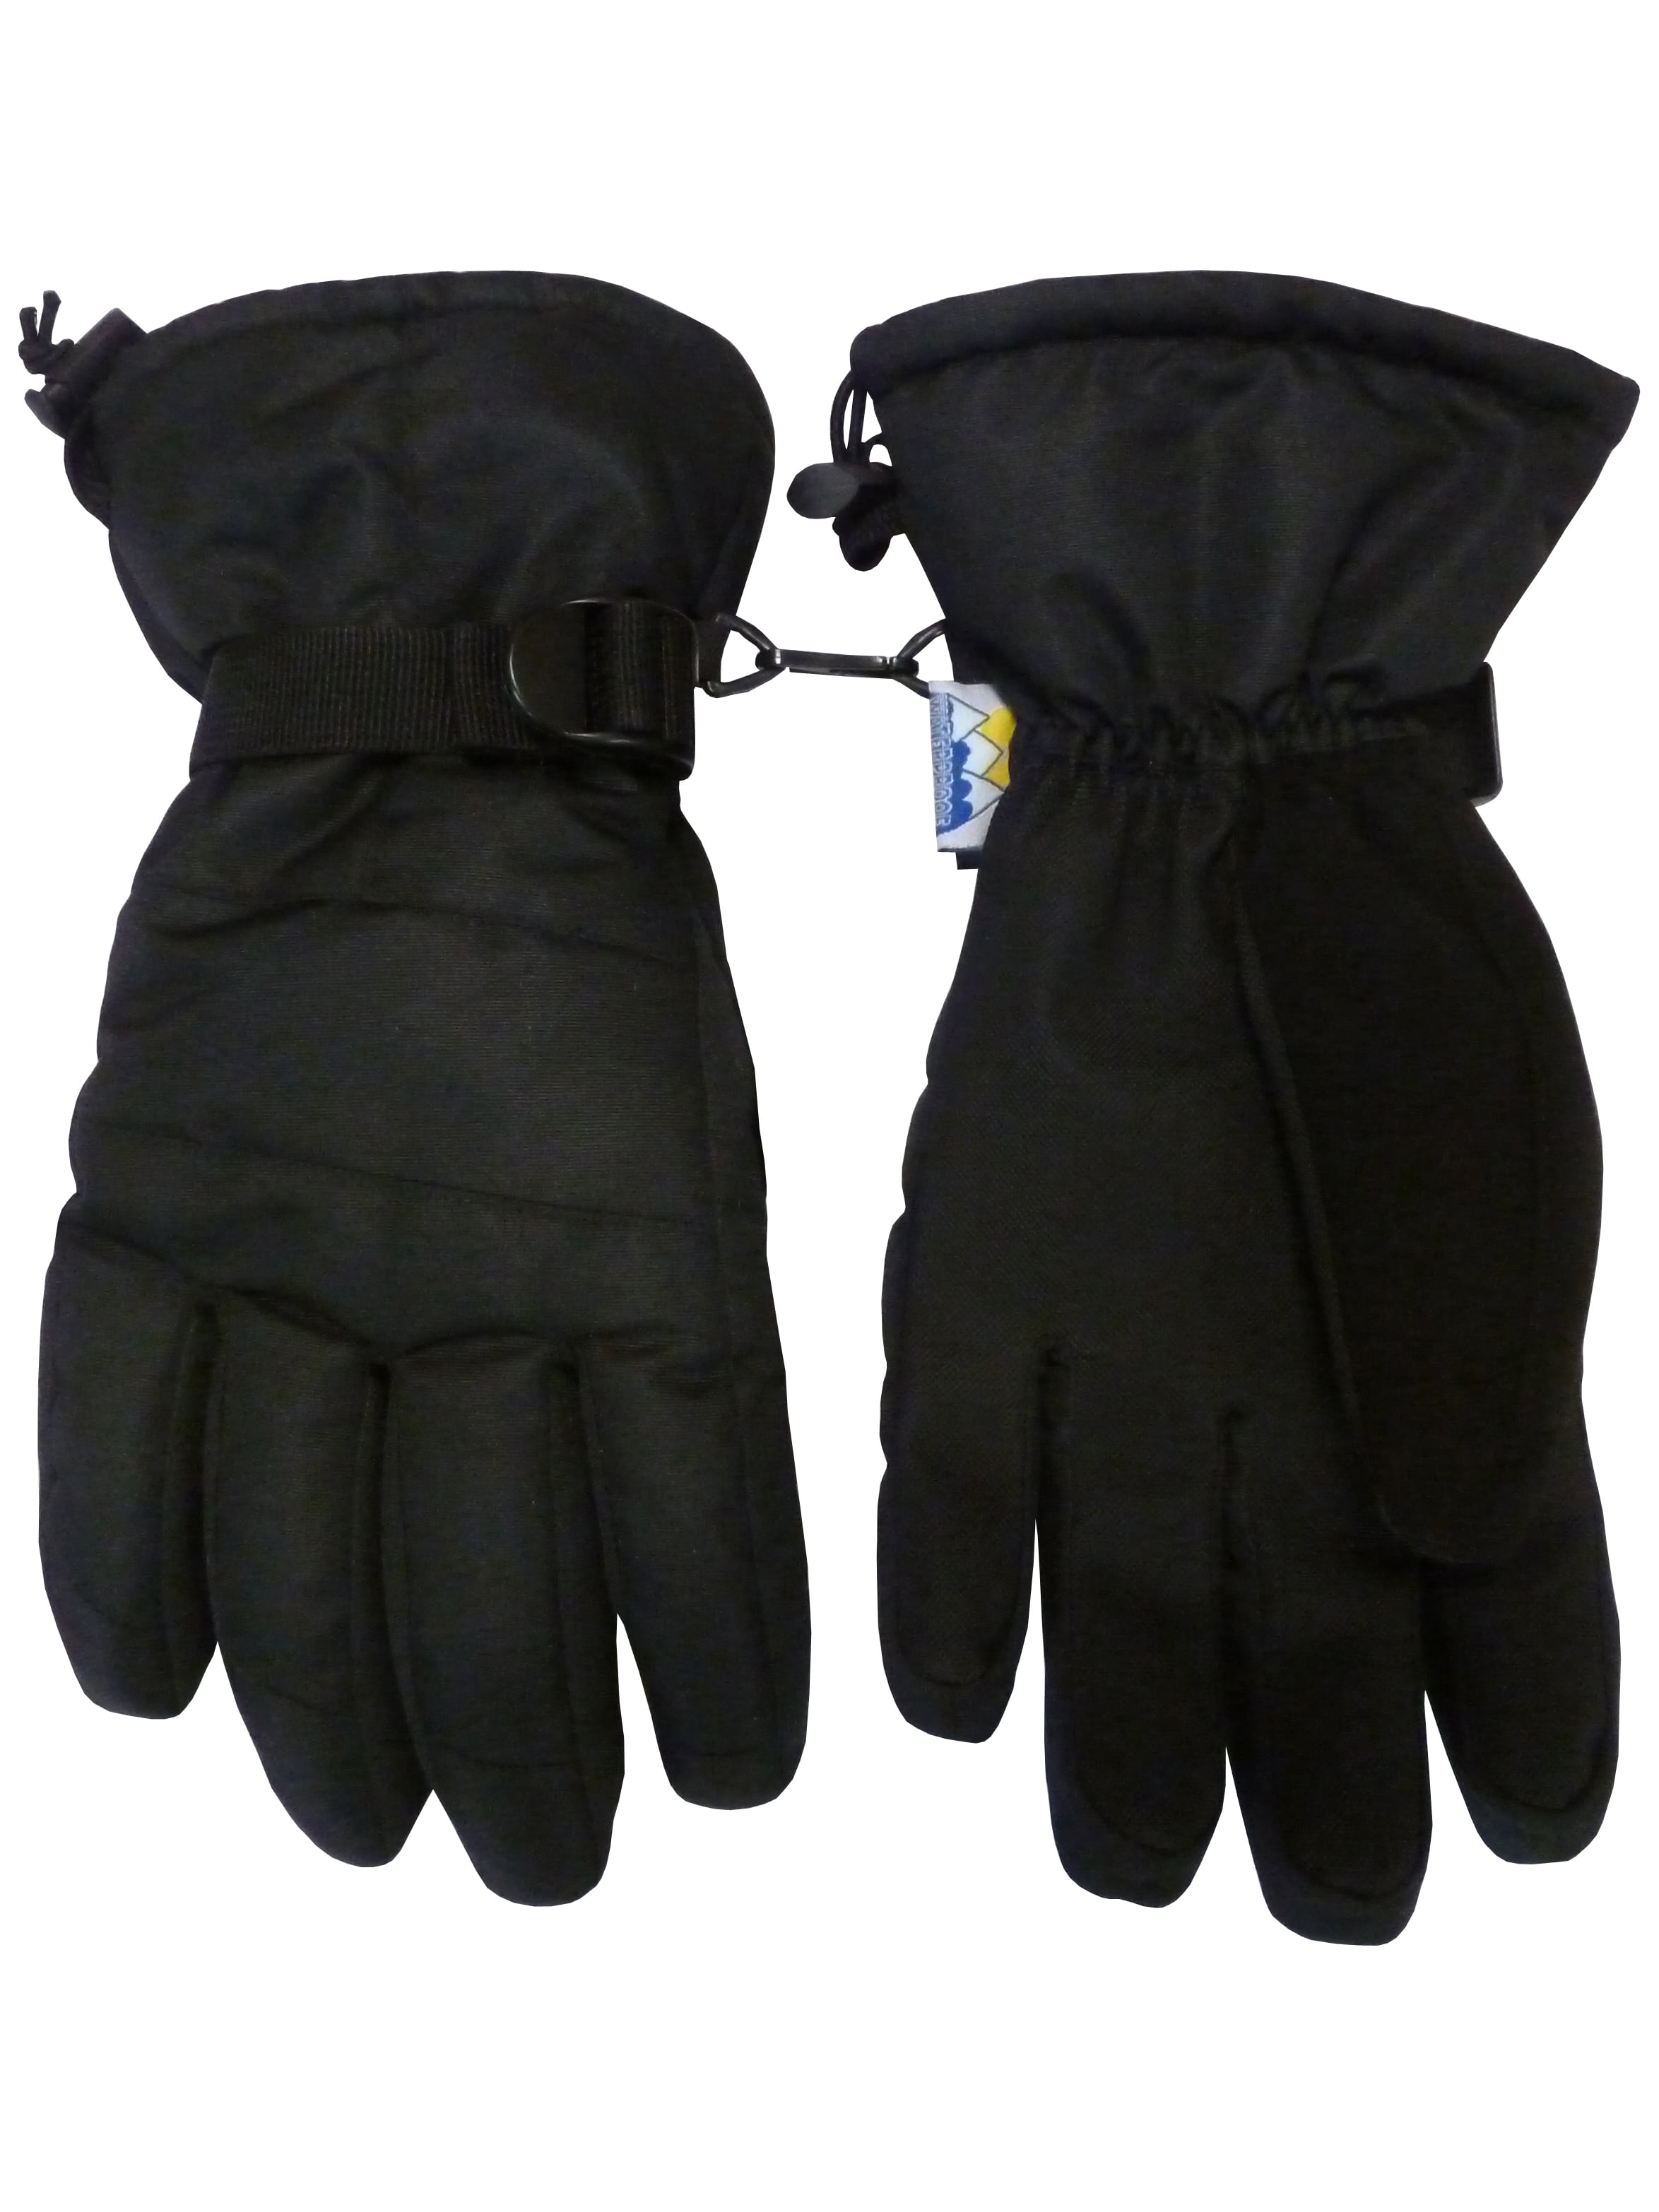 N'Ice Caps - NICE CAPS Mens Adults Thinsulate Waterproof High Performance  Winter Snow Ski Skiing Gloves - For Cold Weather - Walmart.com - Walmart.com